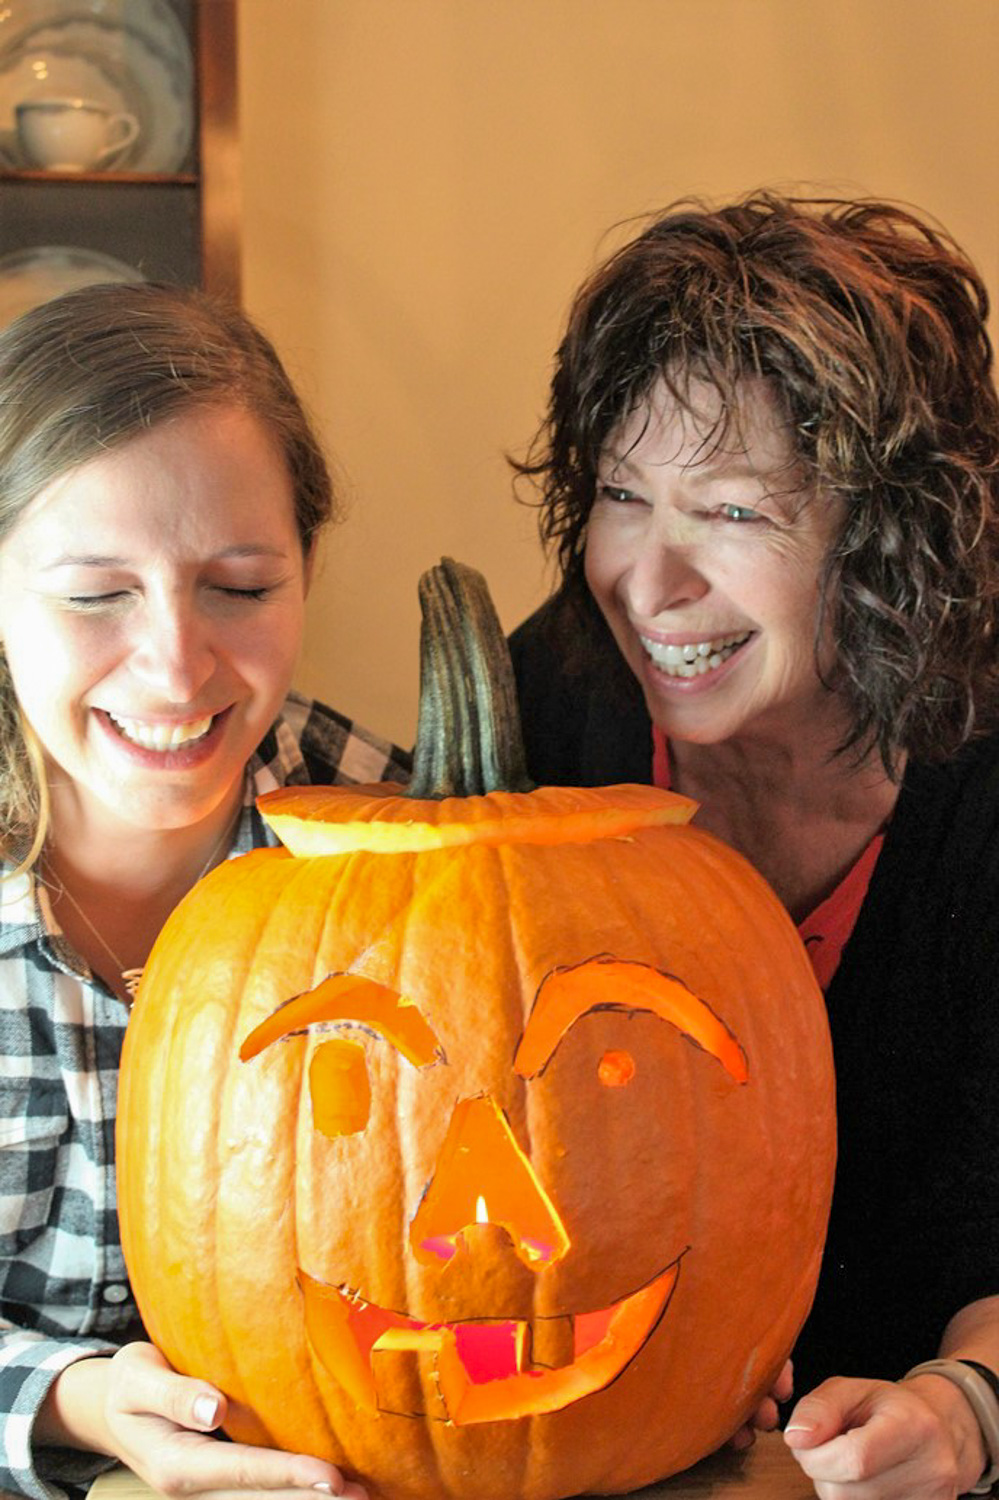 Jenna and Cheryl laughing over their carved pumpkin.